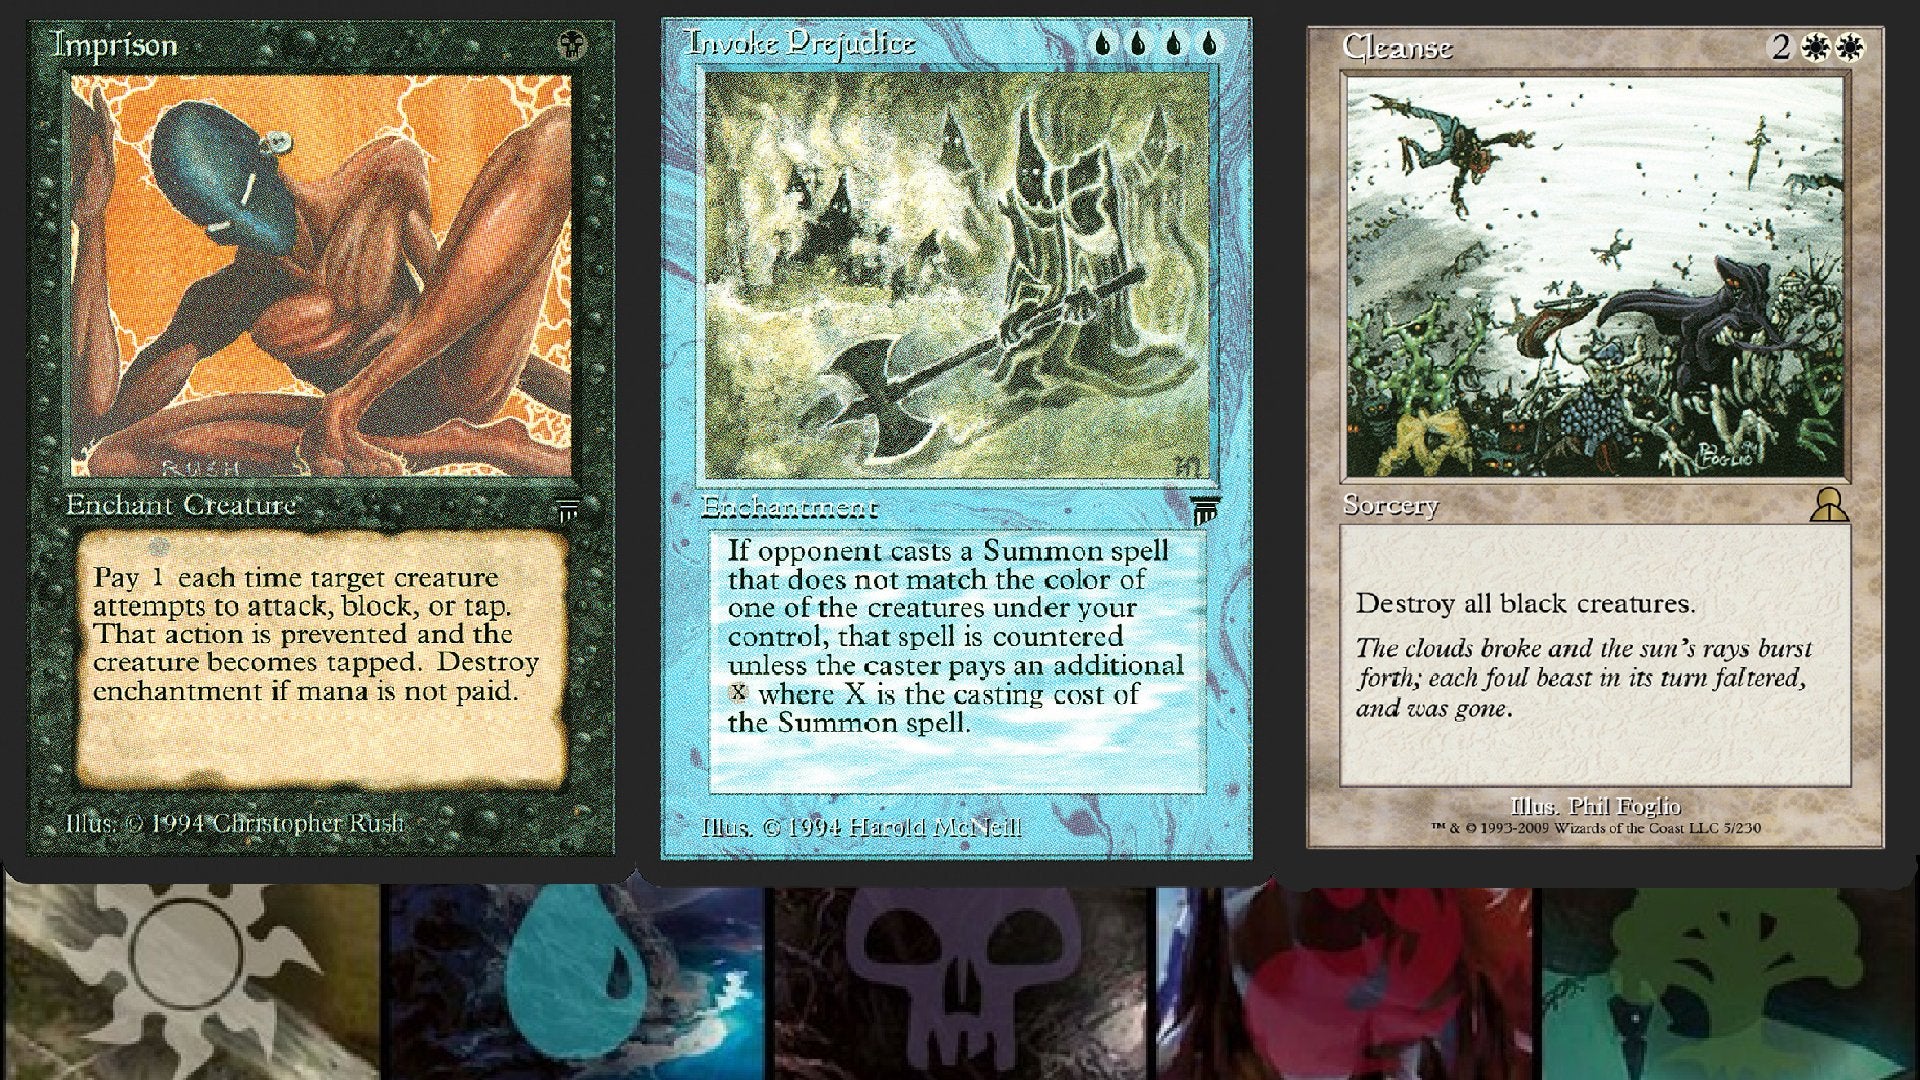 Three racist MTG cards in a row. From left to right: Imprison, Invoke Prejudice, and Cleanse.